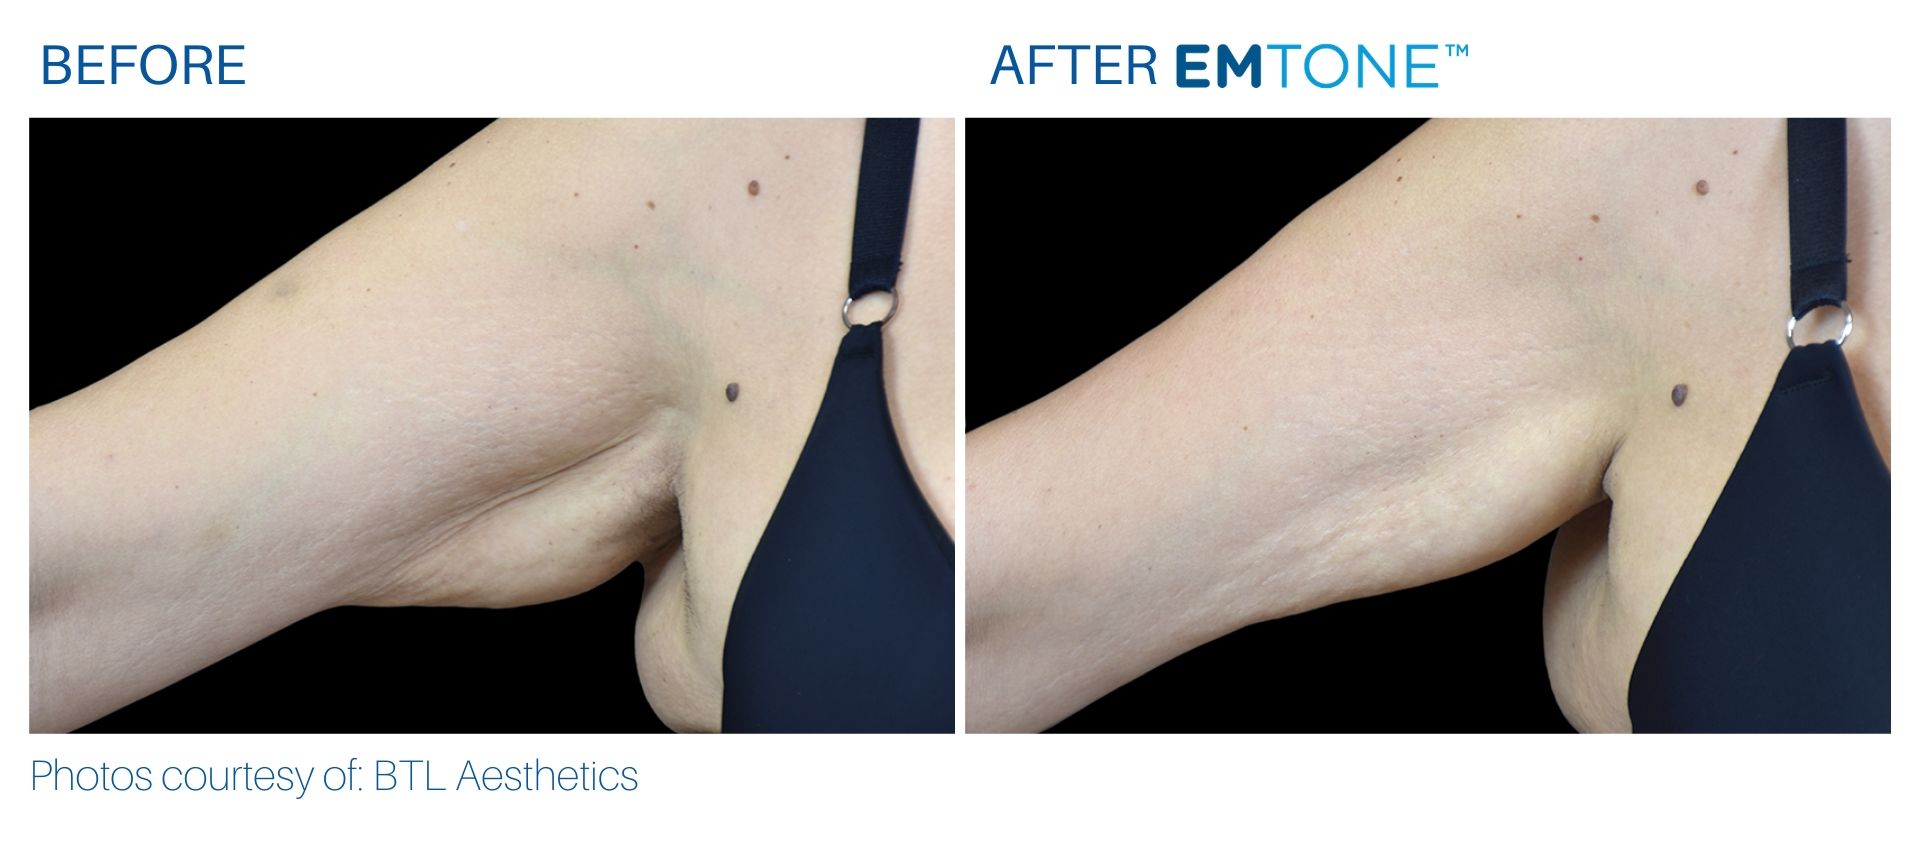 emtone_before_and_after_bodymorphmd_4